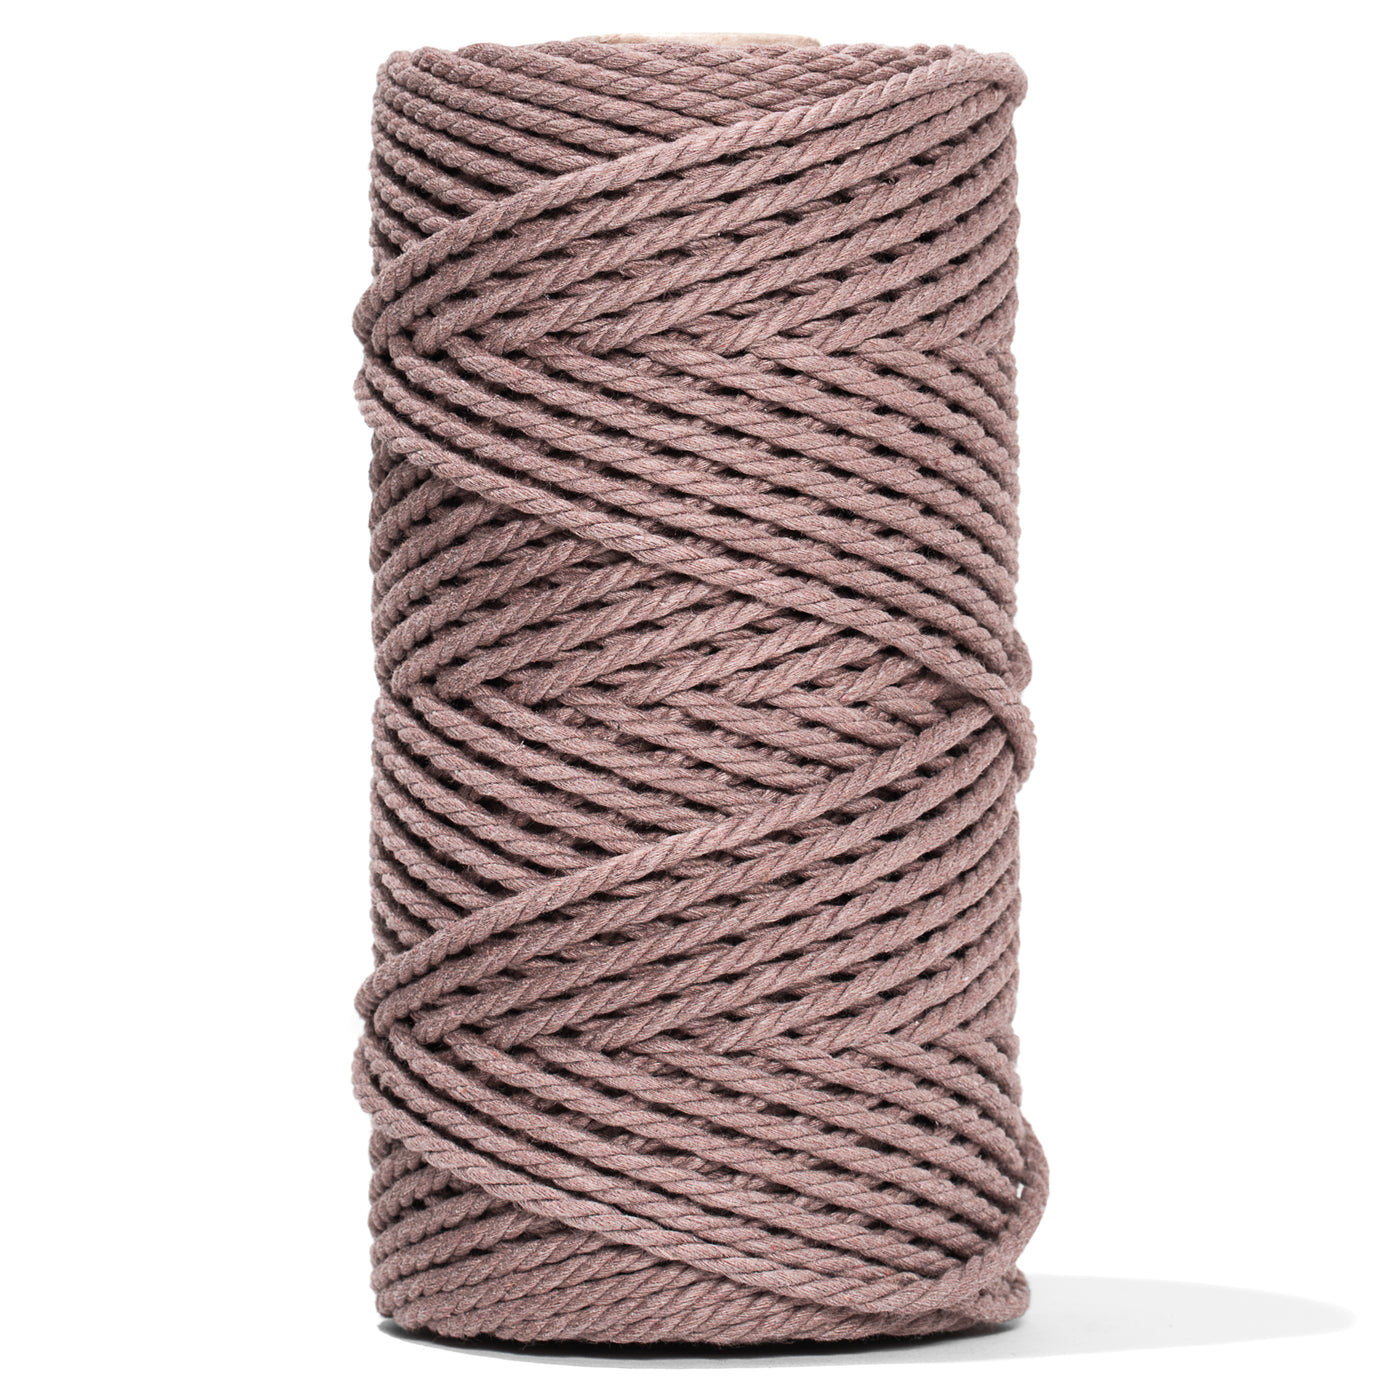 COTTON ROPE ZERO WASTE 3 MM - 3 PLY - MINK COLOR